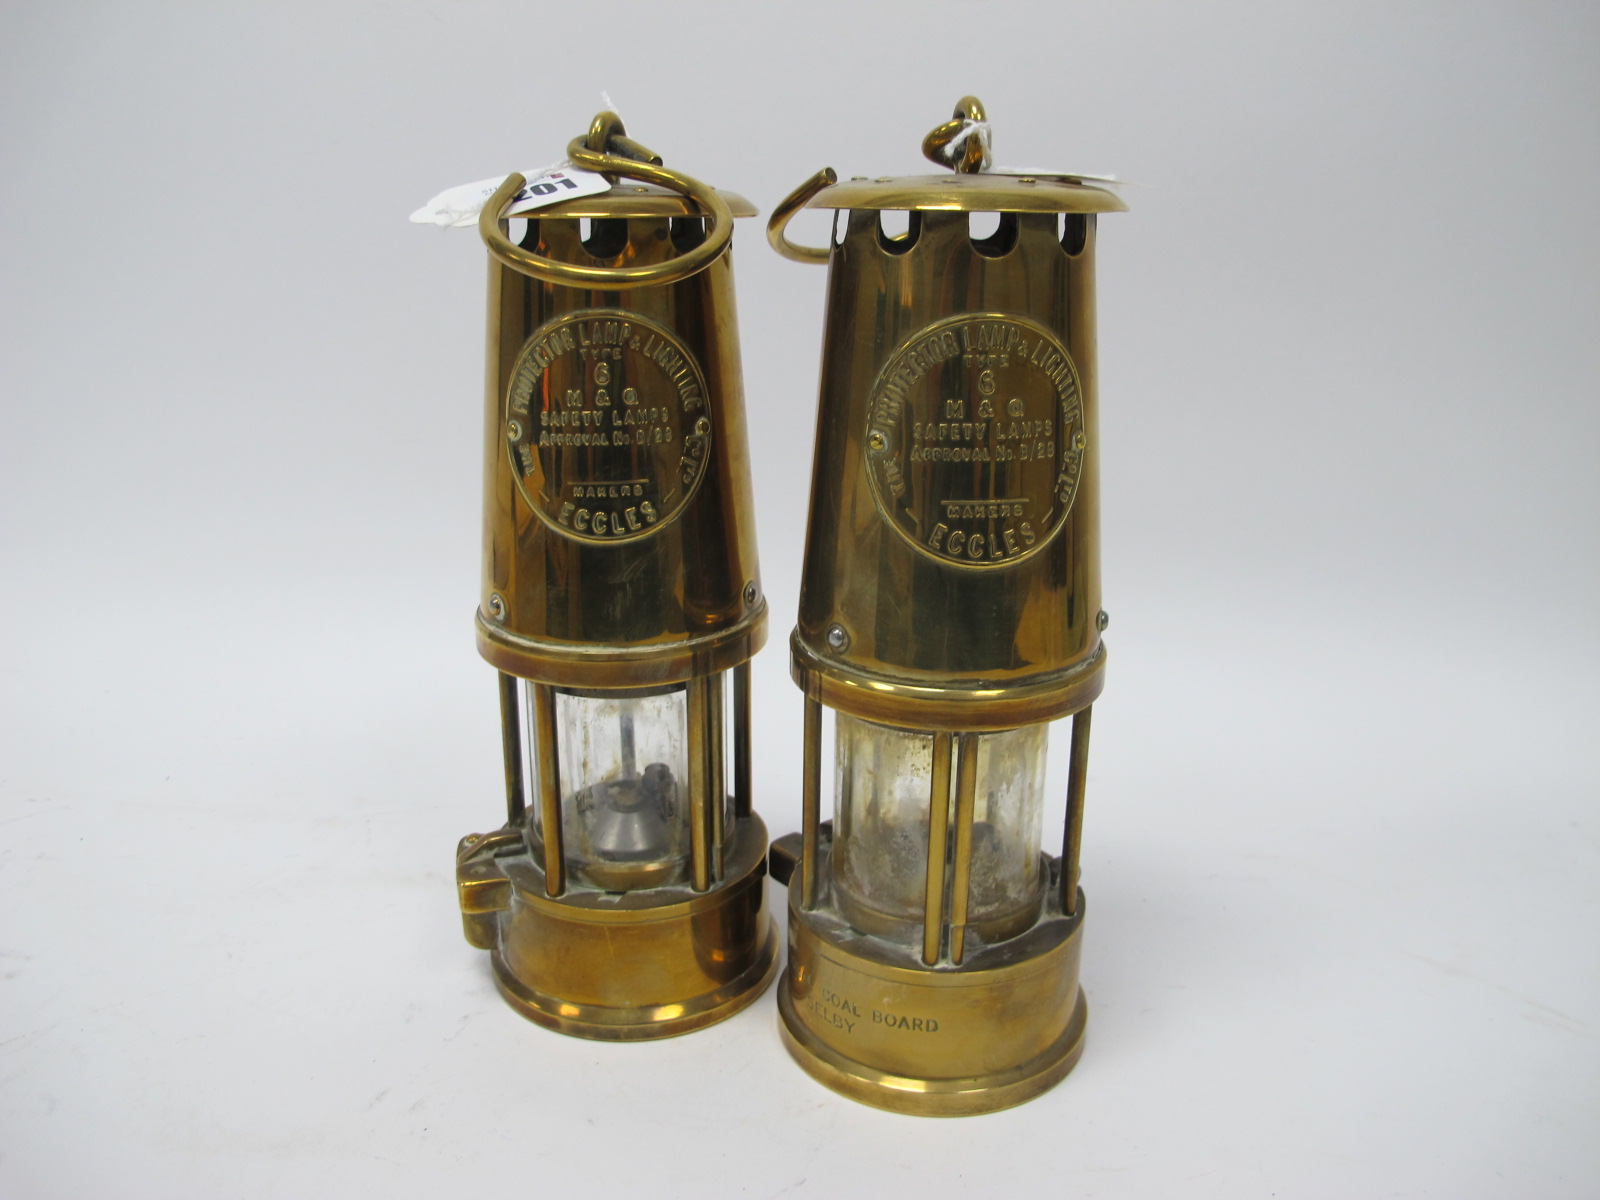 Miners Lamps Projector of Eccles Type 6, M Q both brass bodied, one stamped National Coal Board,